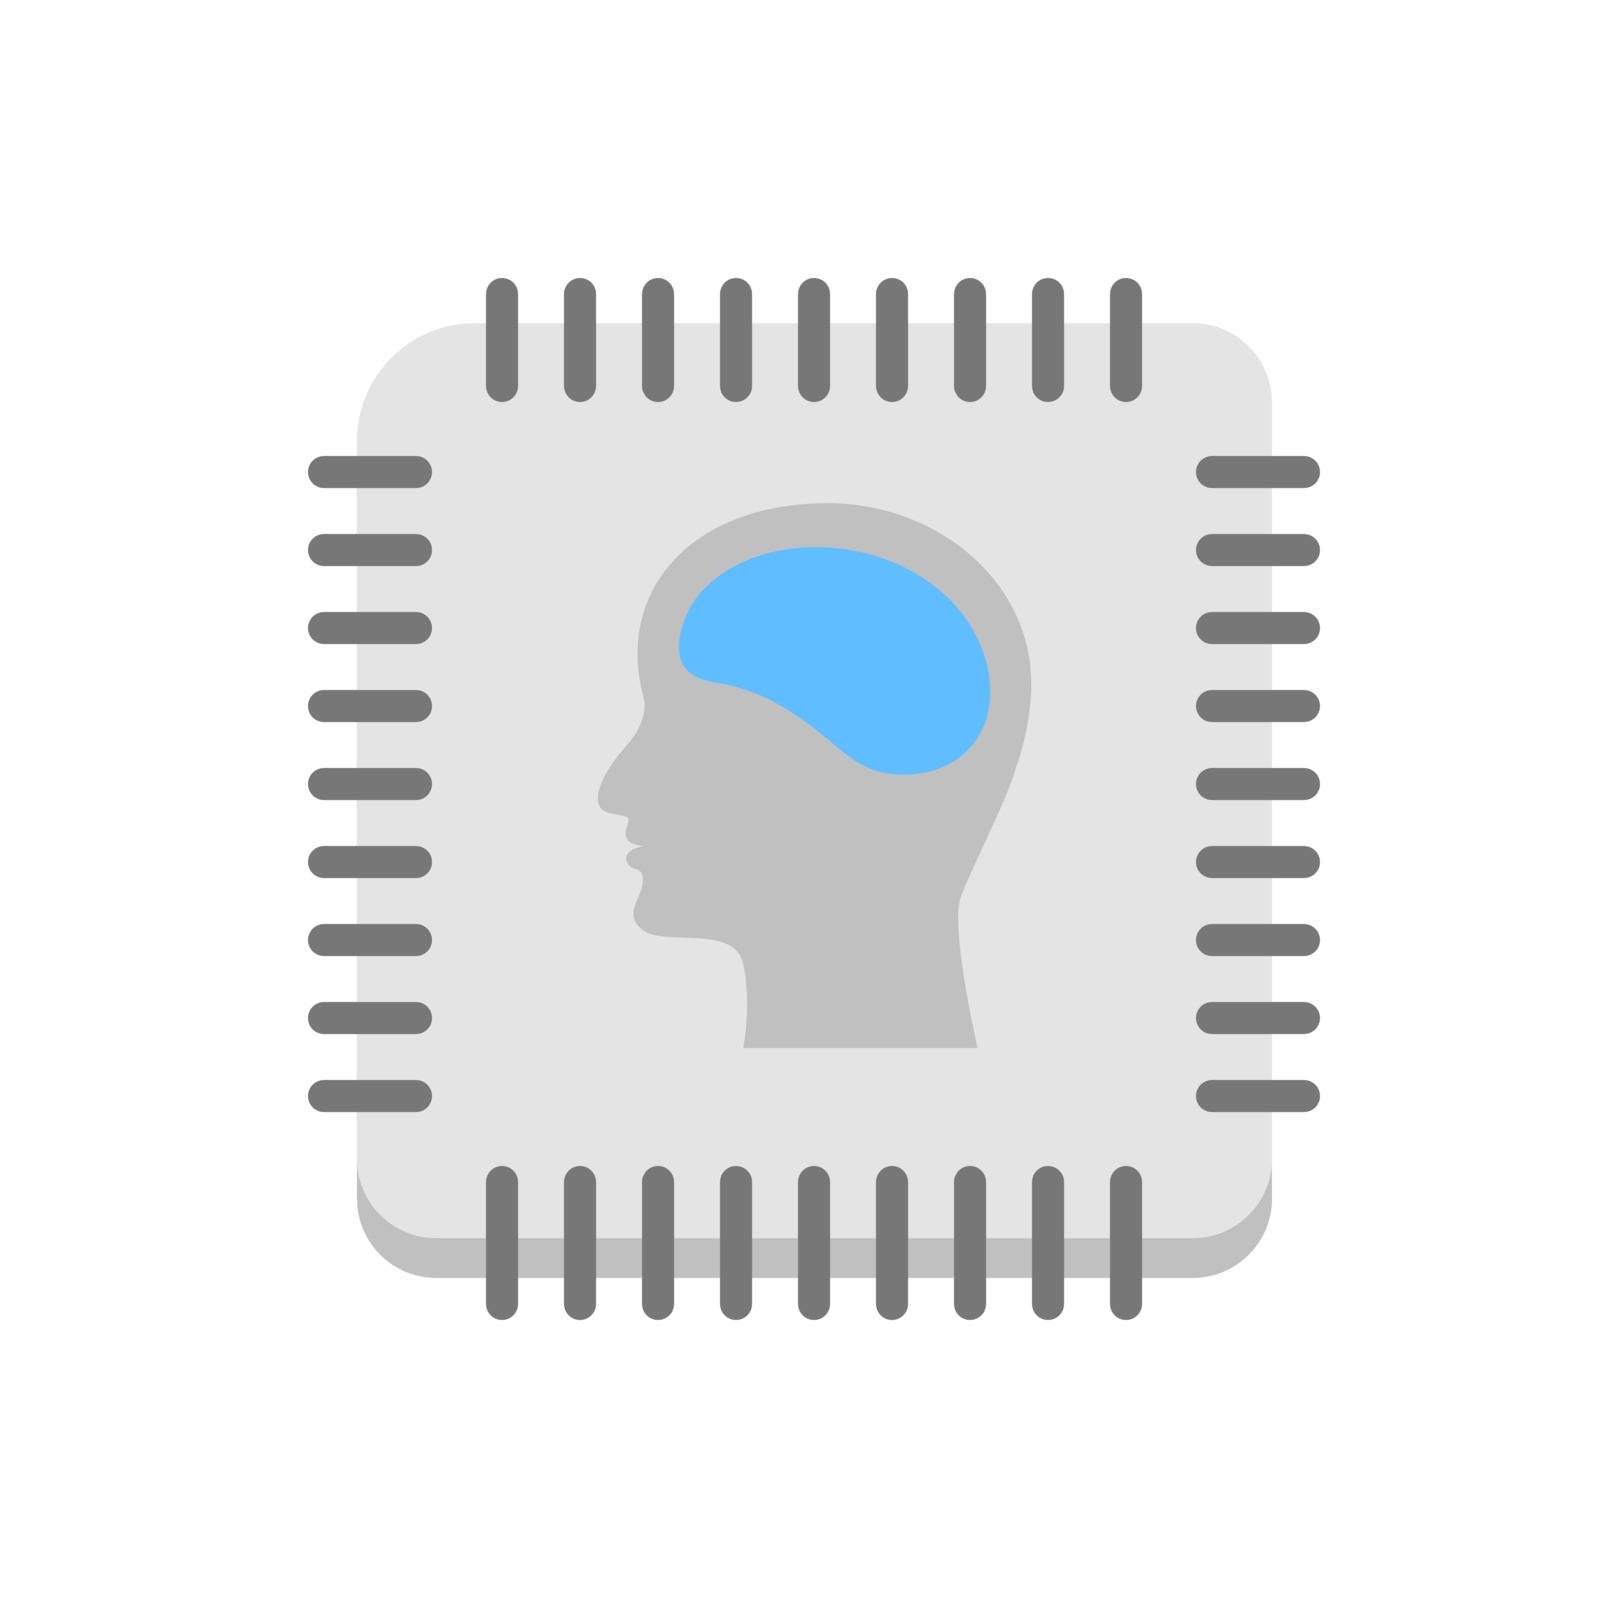 Artificial intelligence icon by Whitebarbie